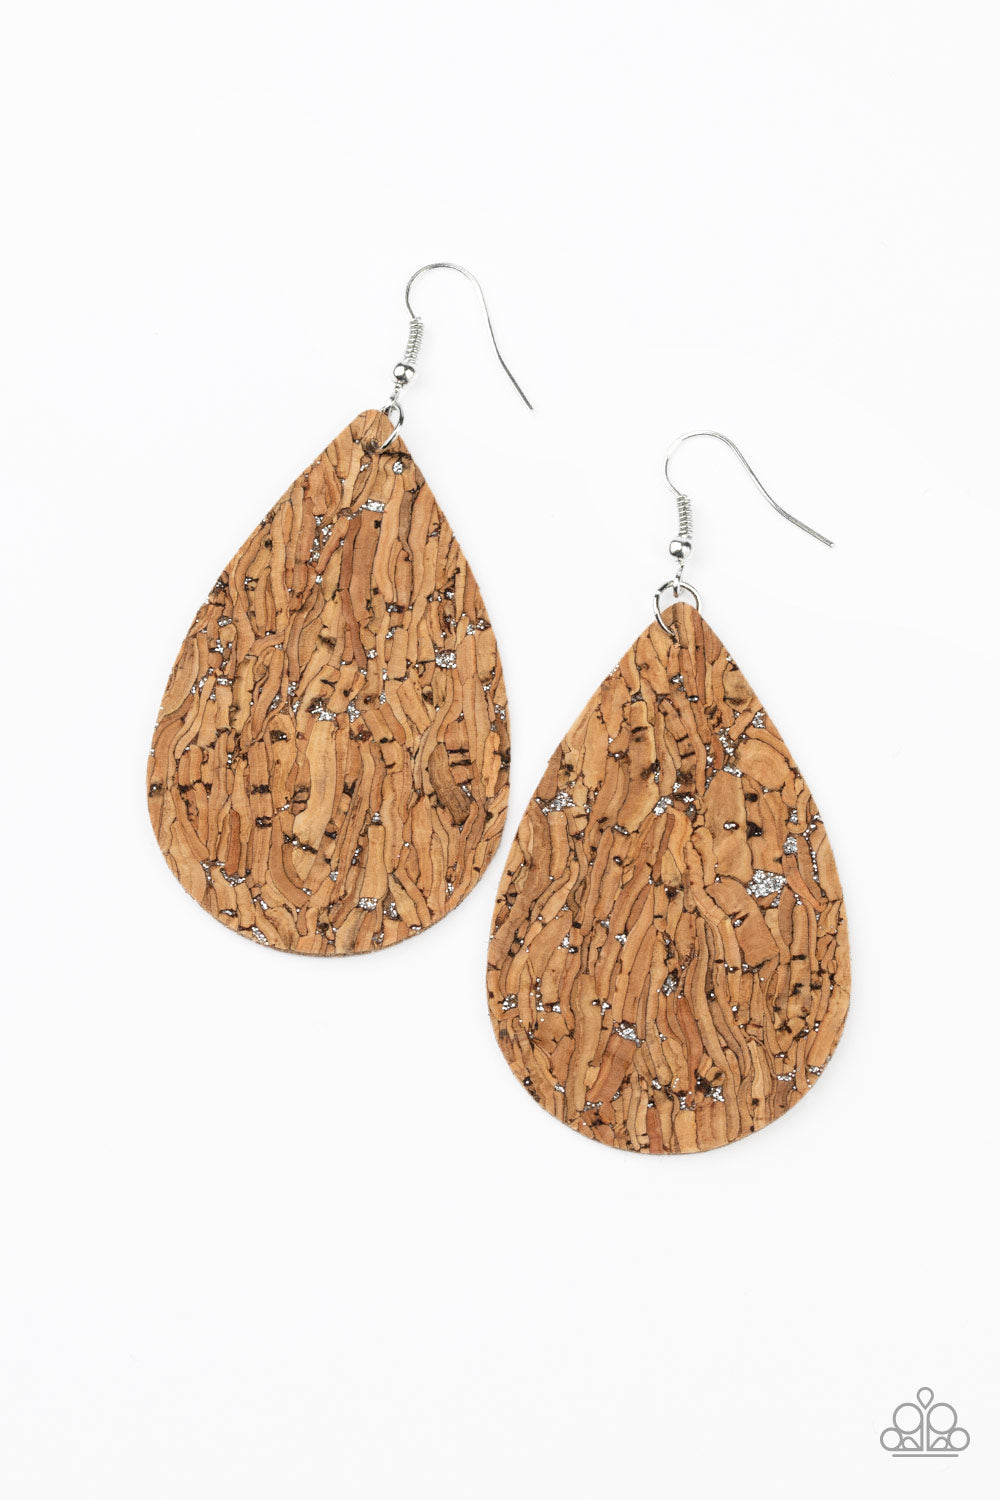 Paparazzi Accessories - CORK It Over - Silver Earrings